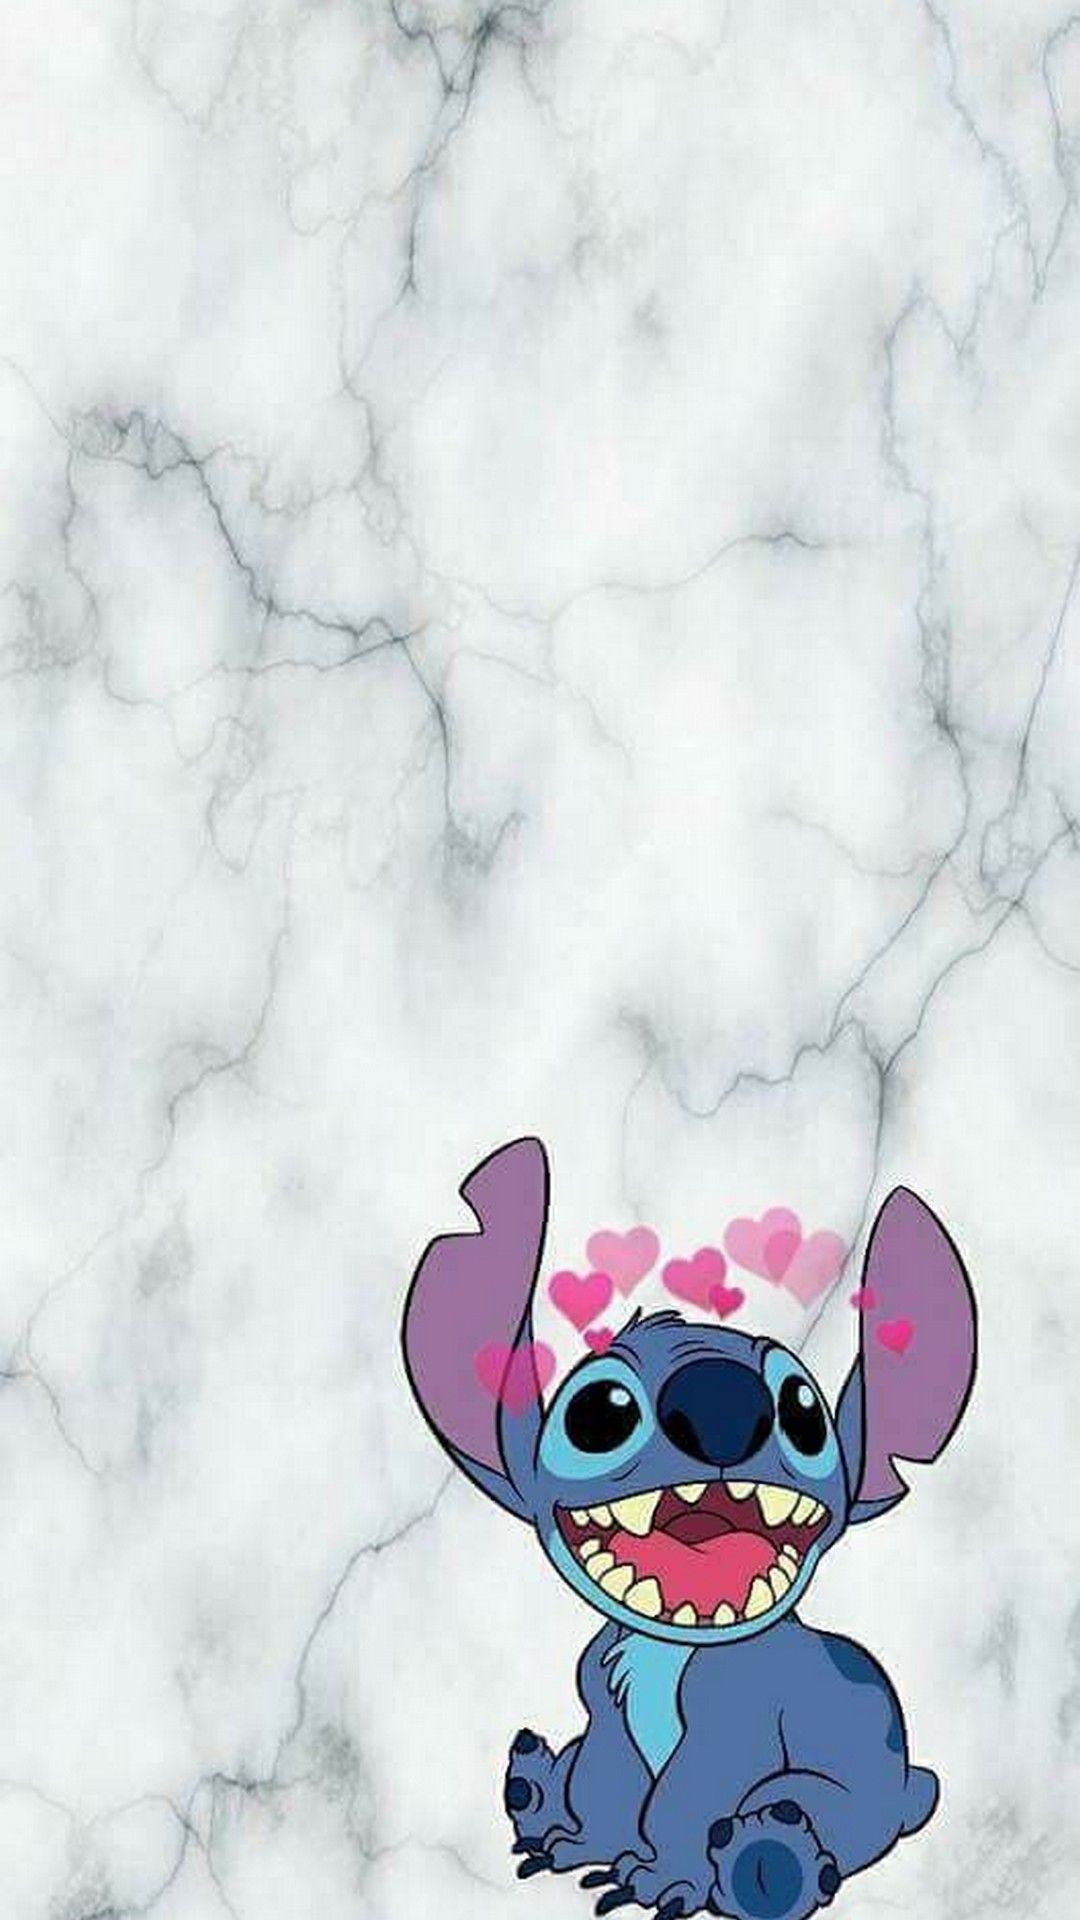 Cute Stitch Wallpapers On Wallpaperdog Minions cute baby yoda harley quinn mickey mouse groot moana disney princesses winnie the pooh lilo and stitch. cute stitch wallpapers on wallpaperdog